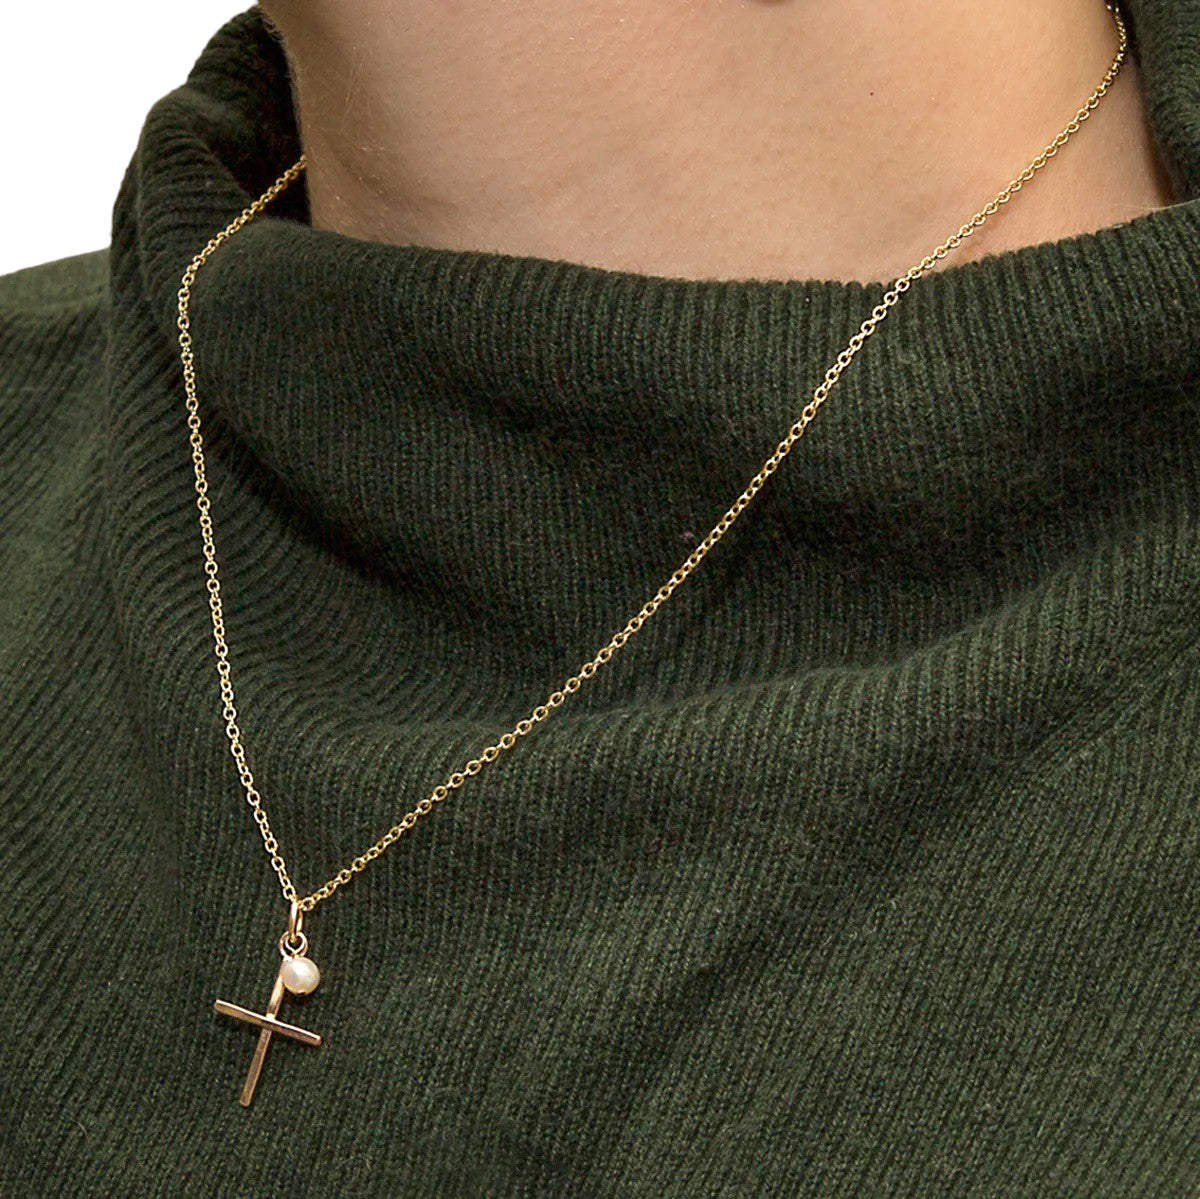 Cross and Pearl Pendant - gold filled